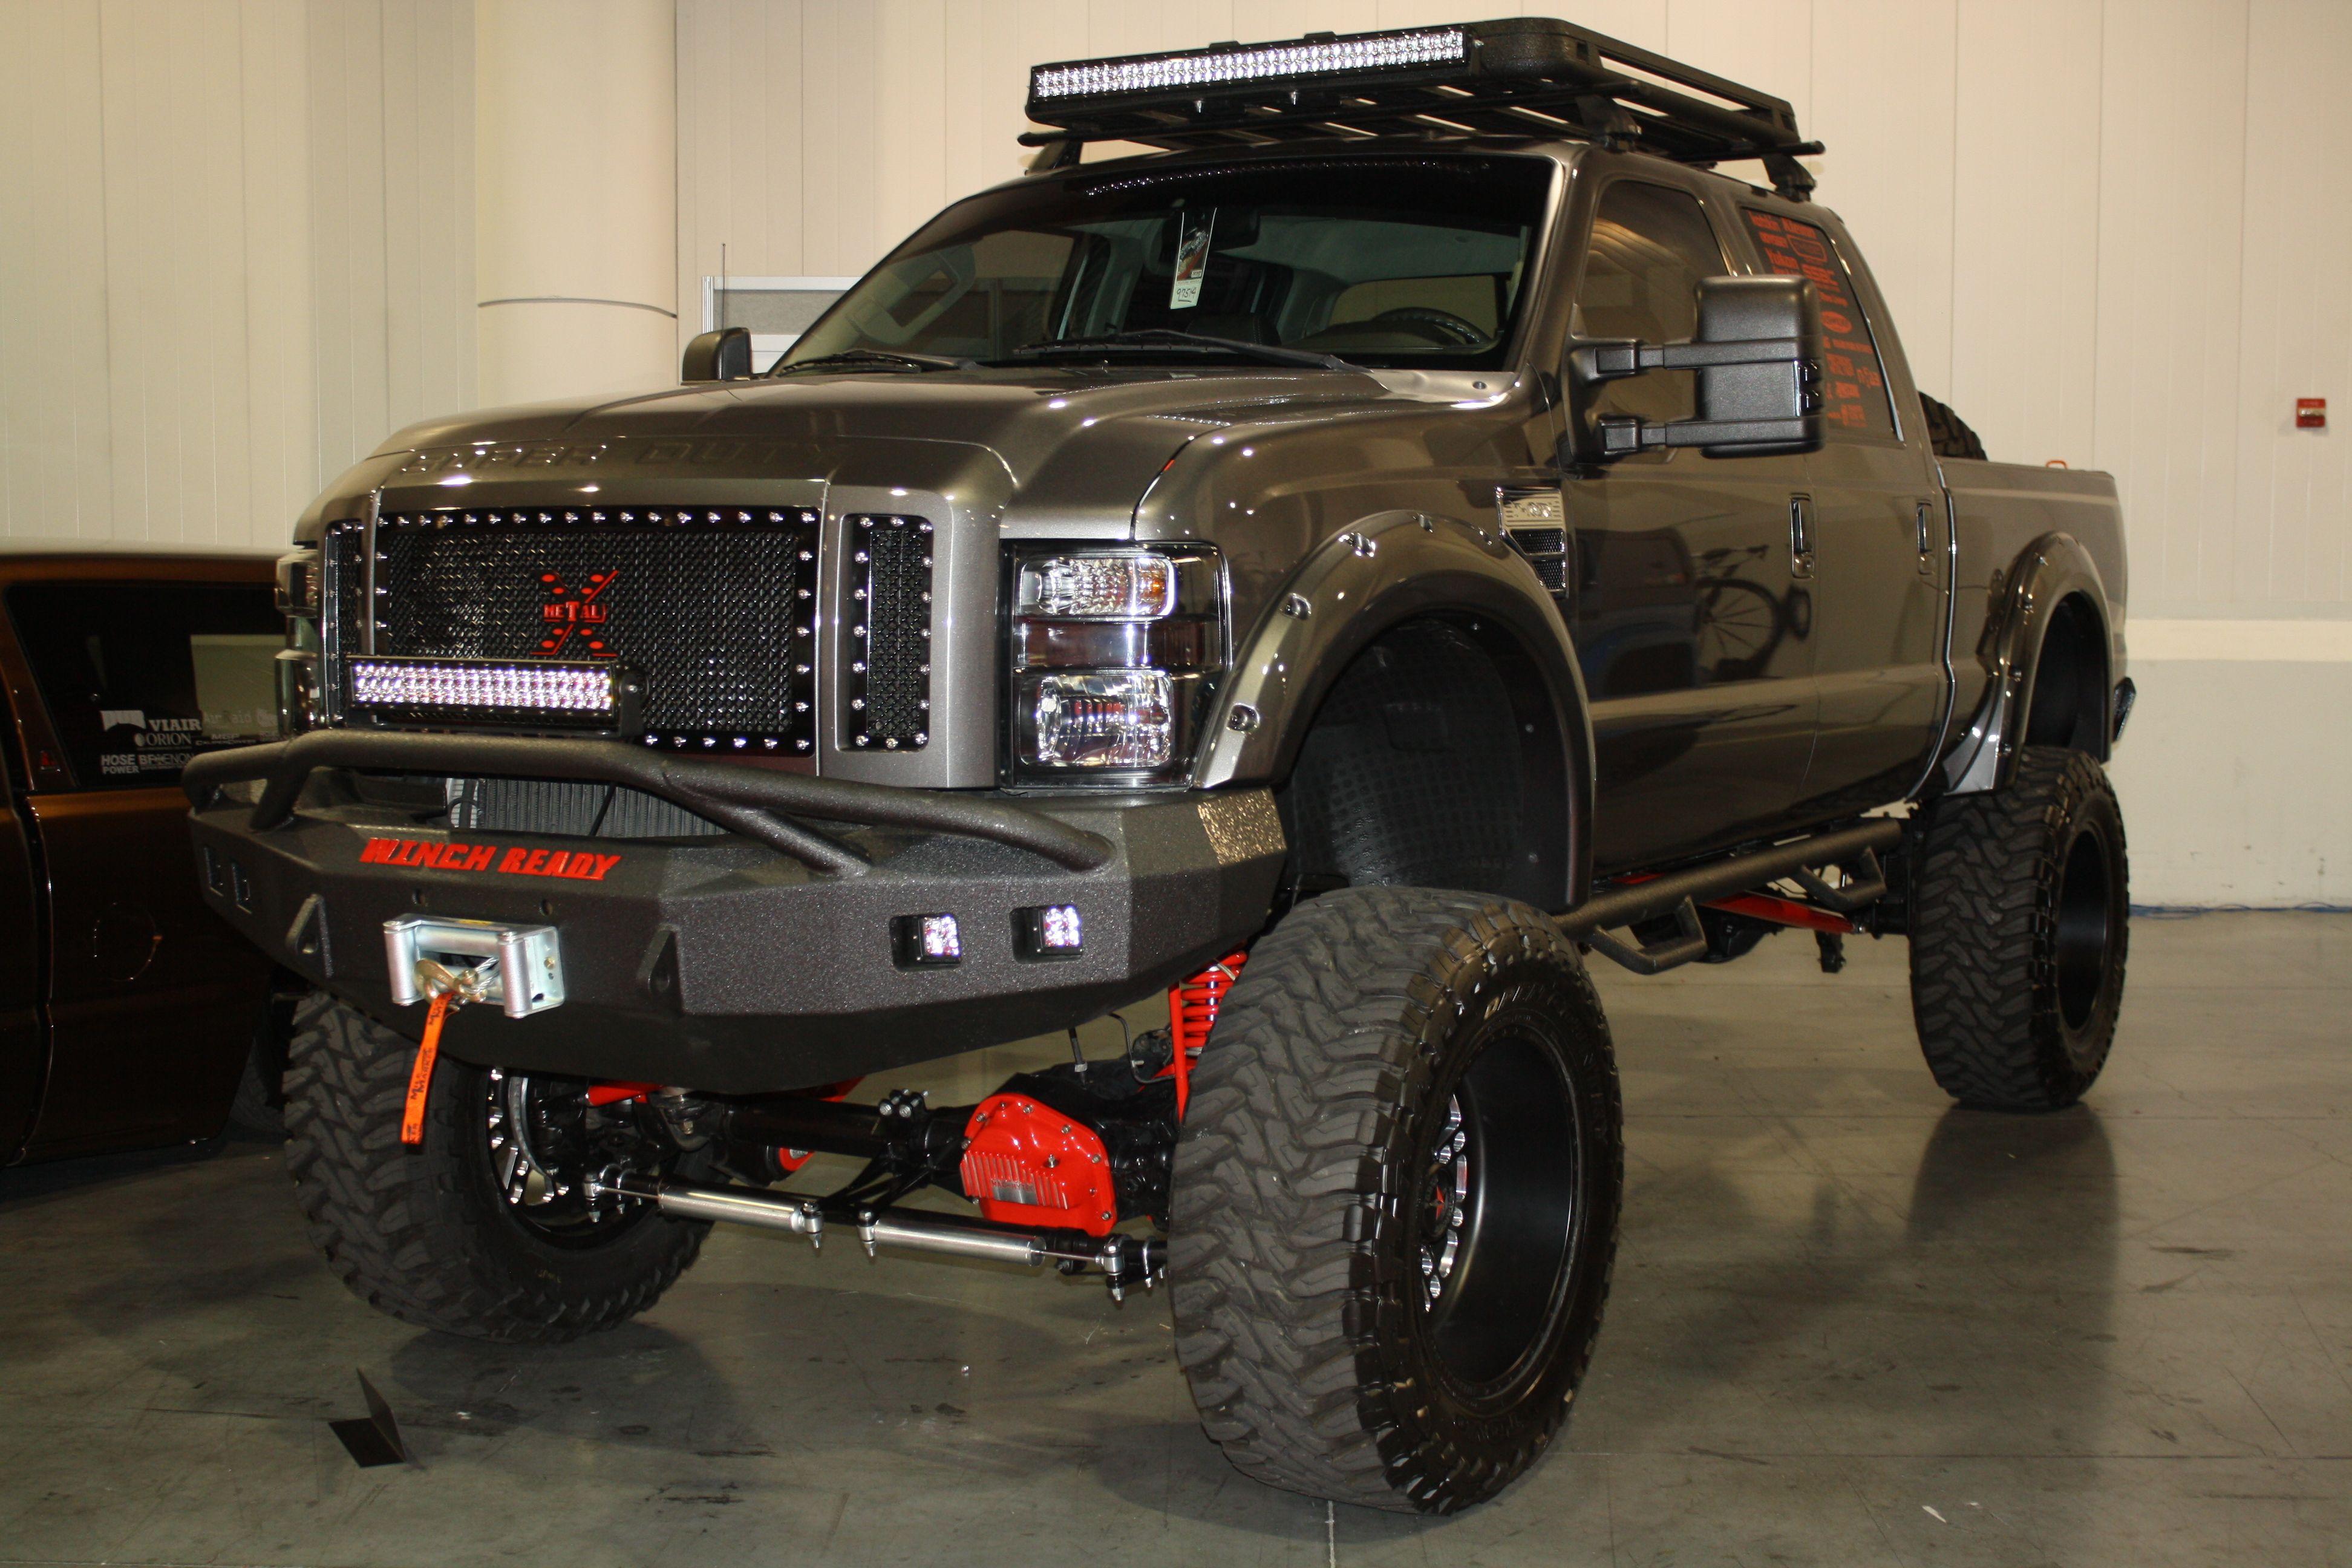 Lifted Gmc Truck Wallpaper Image Gallery